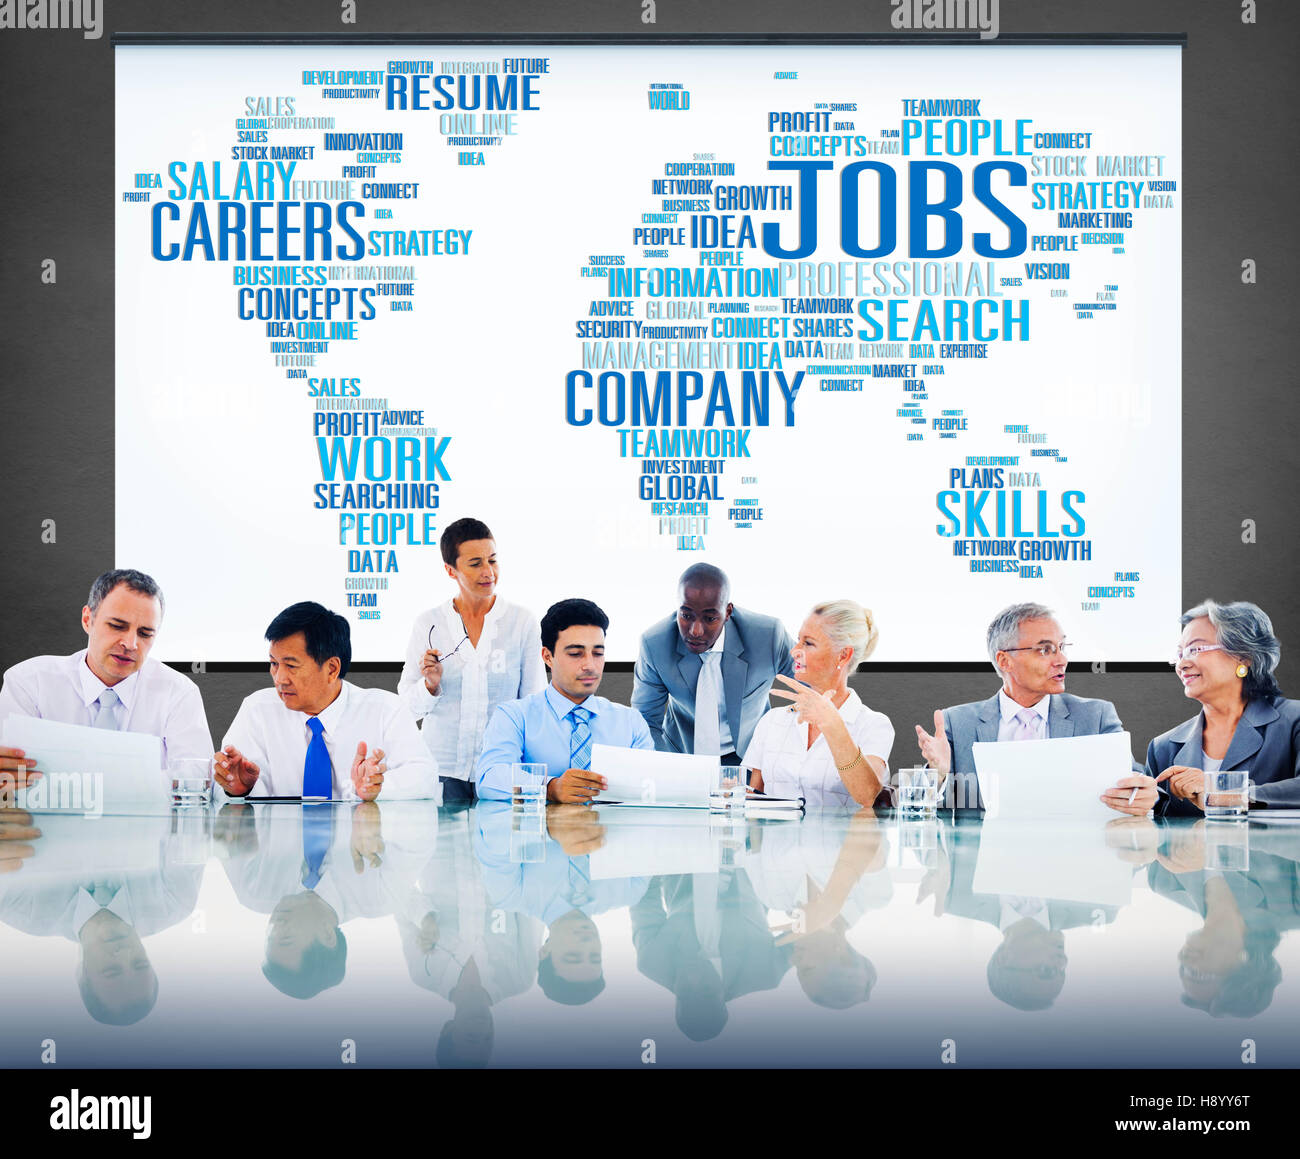 Jobs Occupation Careers Recruitment Employment Concept Stock Photo